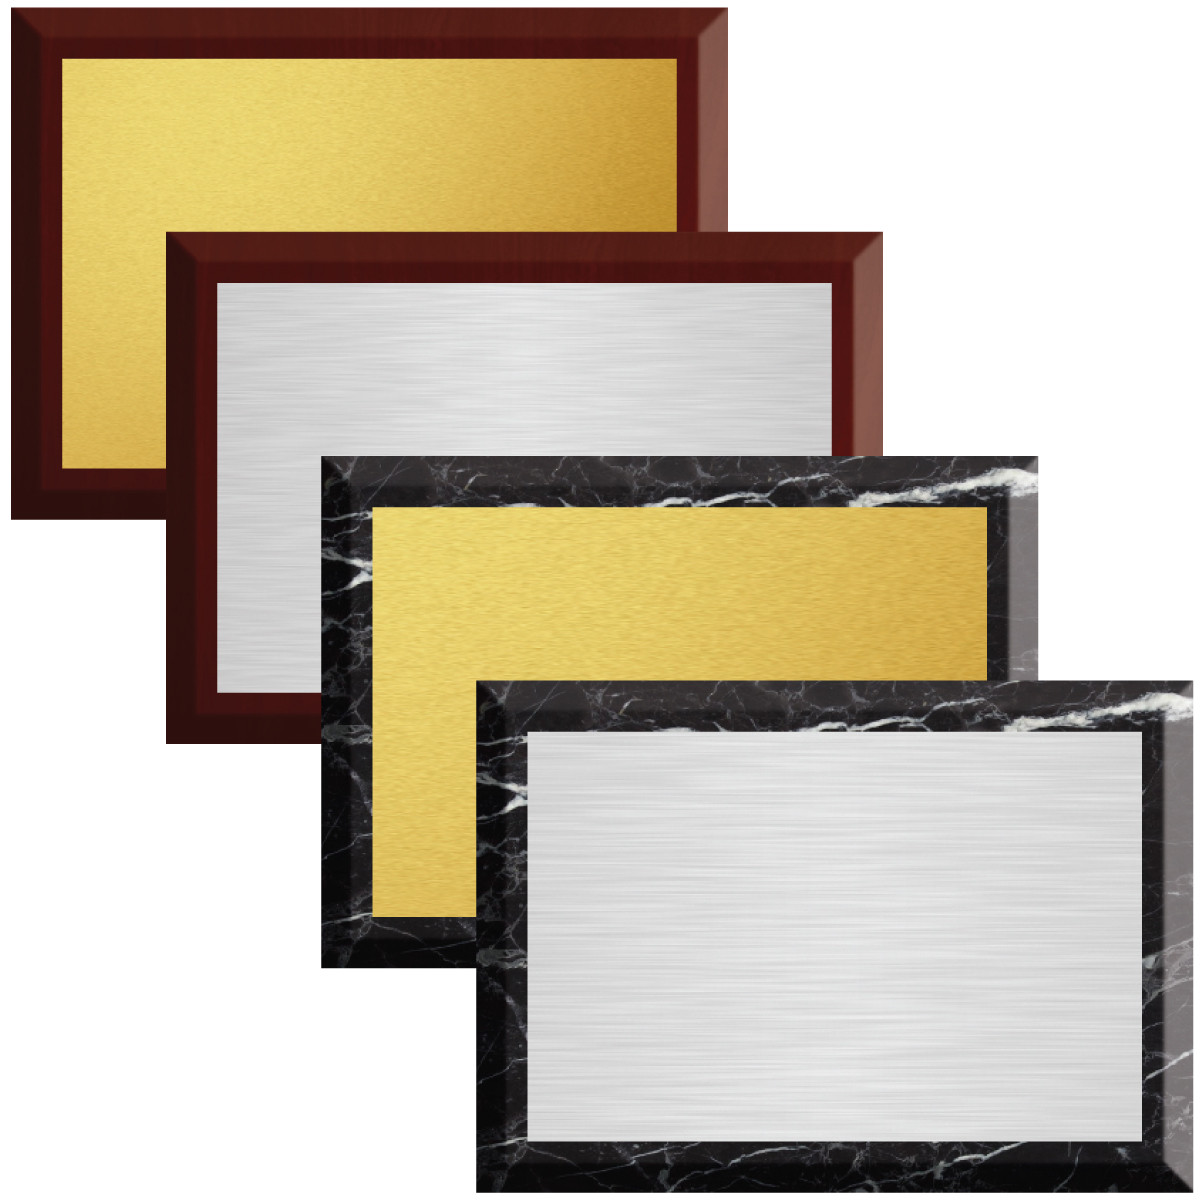 Sublimated Plaques - Color Metal Award 5" x 7"